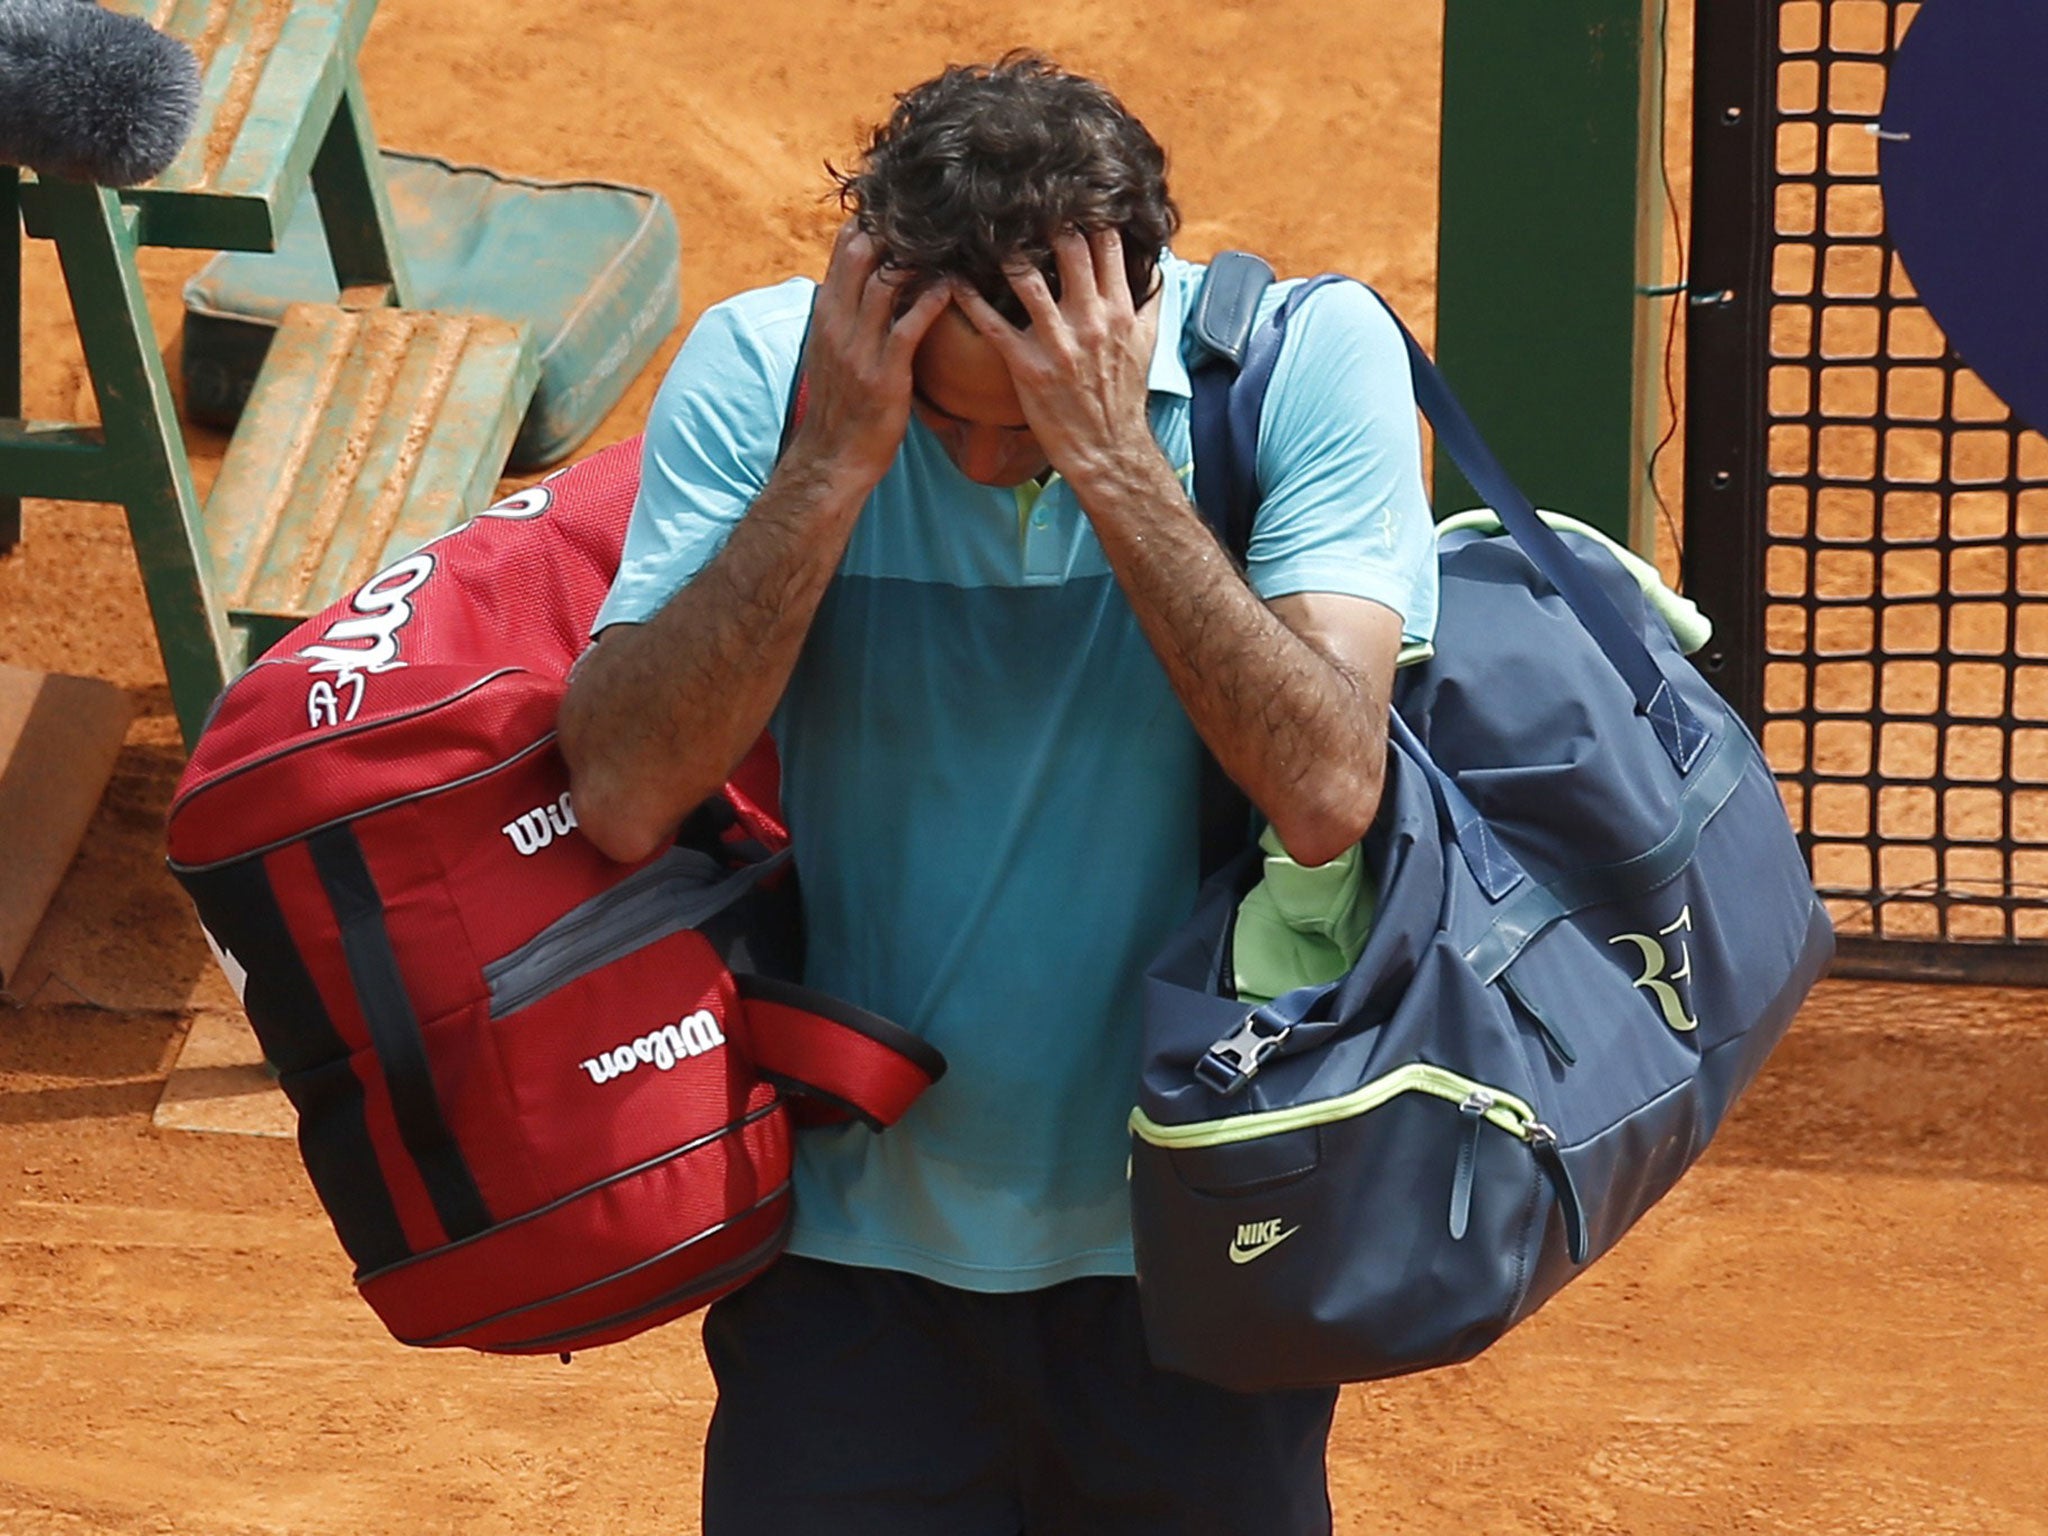 Roger Federer reacts after losing to Gael Monfils in the Monte Carlo Masters